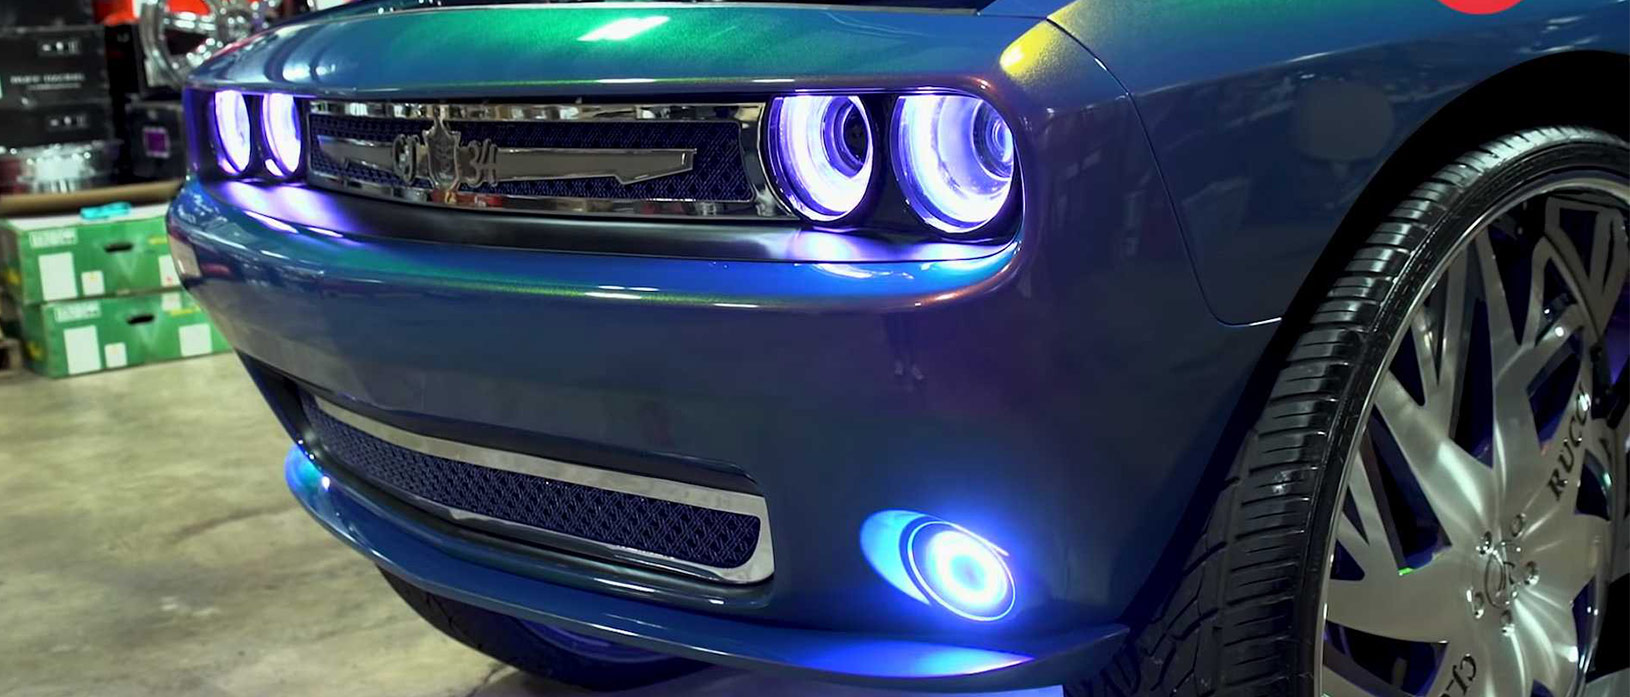 This Custom 2017 Dodge Challenger R/T is loud…to say the least